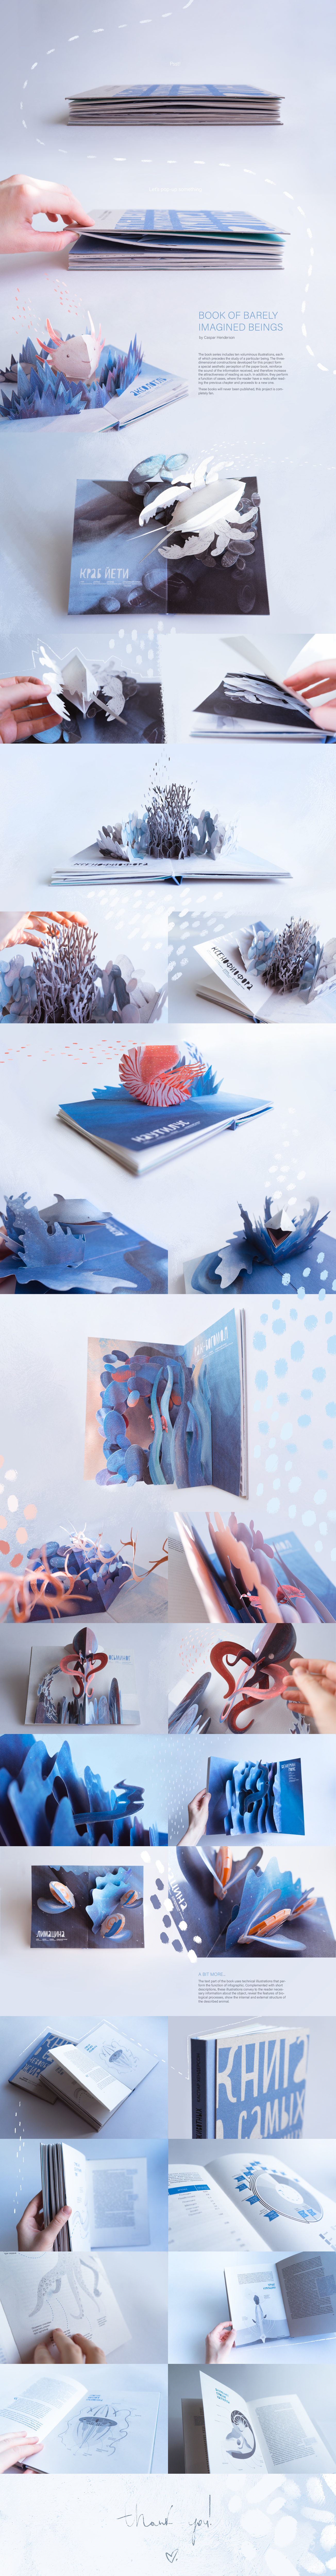 POP-UP Book Design: Barely Imagined Beings